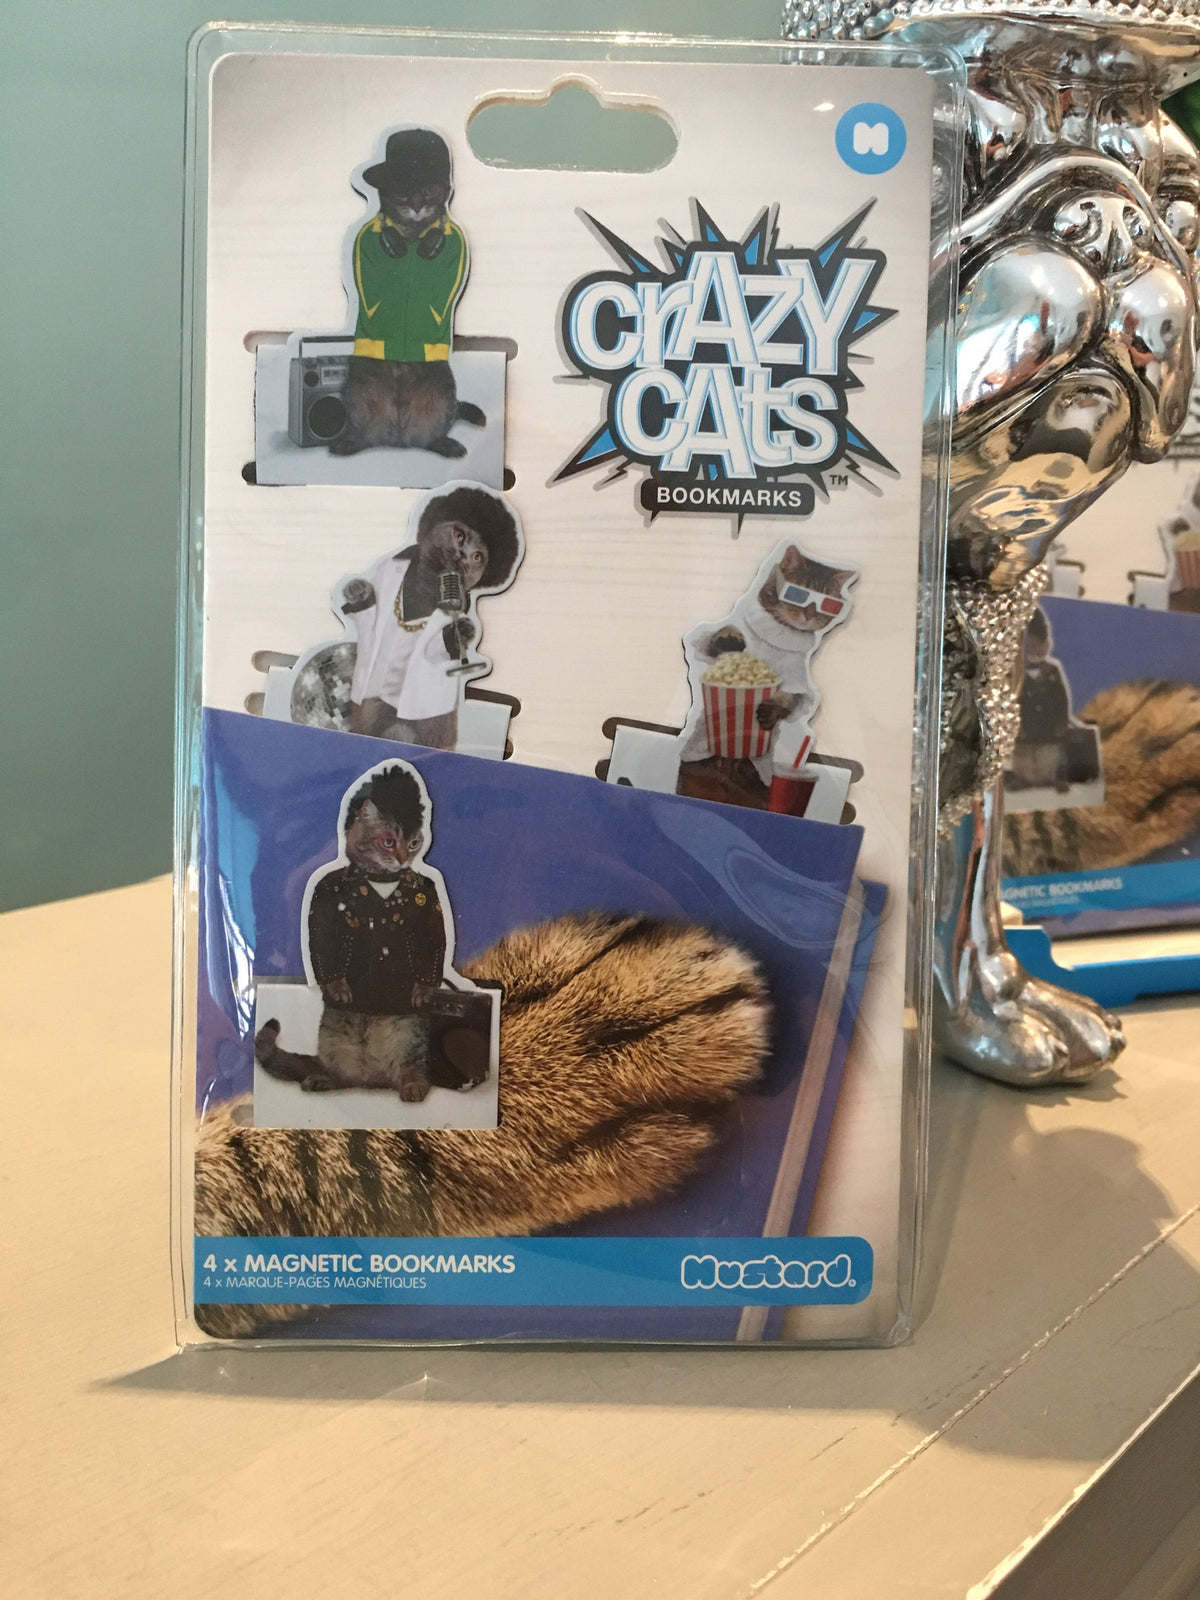 Crazy Cats Bookmarks